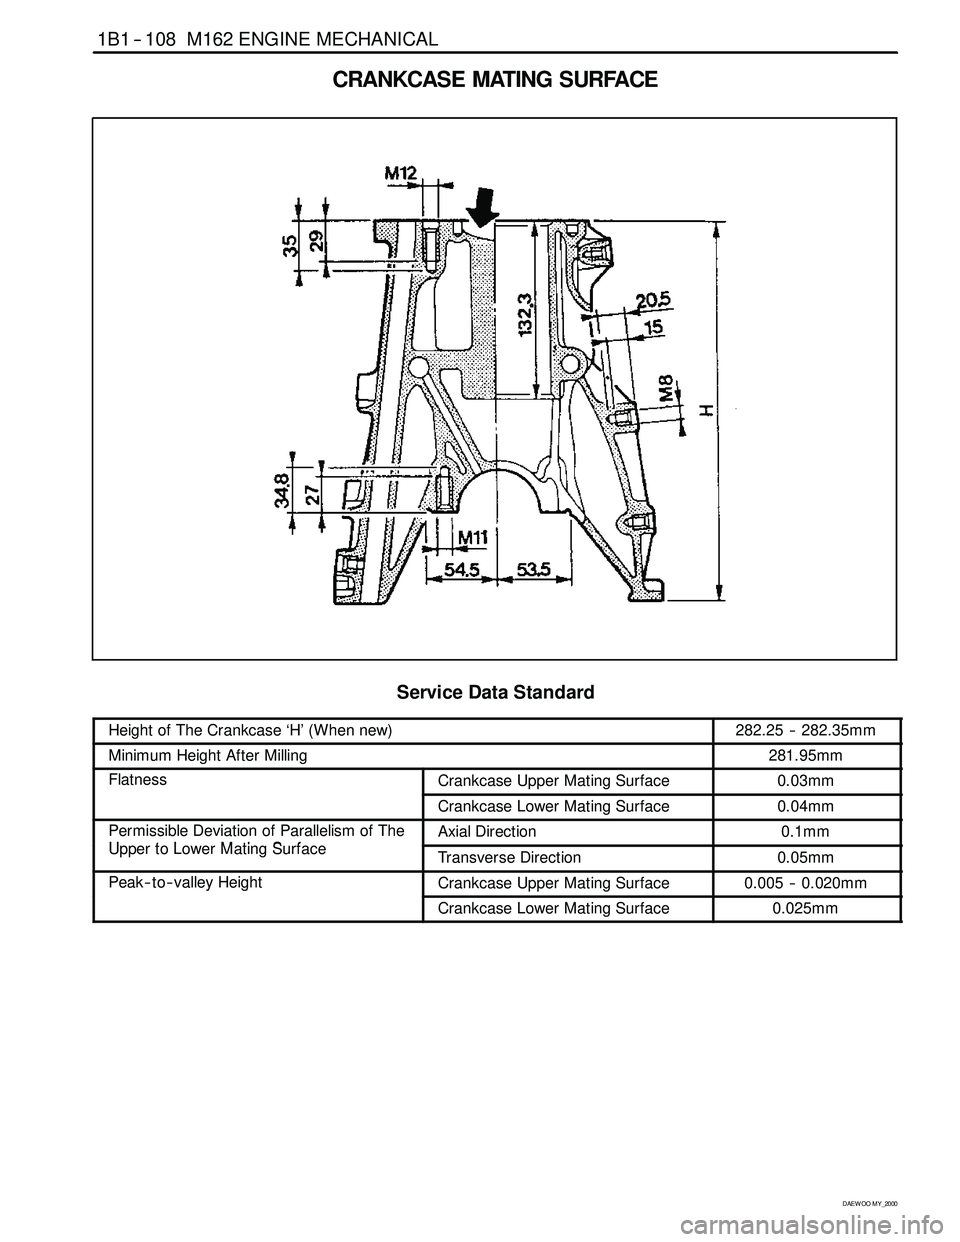 SSANGYONG KORANDO 1997  Service Repair Manual 1B1 -- 108 M162 ENGINE MECHANICAL
D AEW OO M Y_2000
CRANKCASE MATING SURFACE
ServiceDataStandard
Height of The Crankcase ‘H’ (When new)282.25 -- 282.35mm
Minimum Height After Milling281.95mm
Flatn